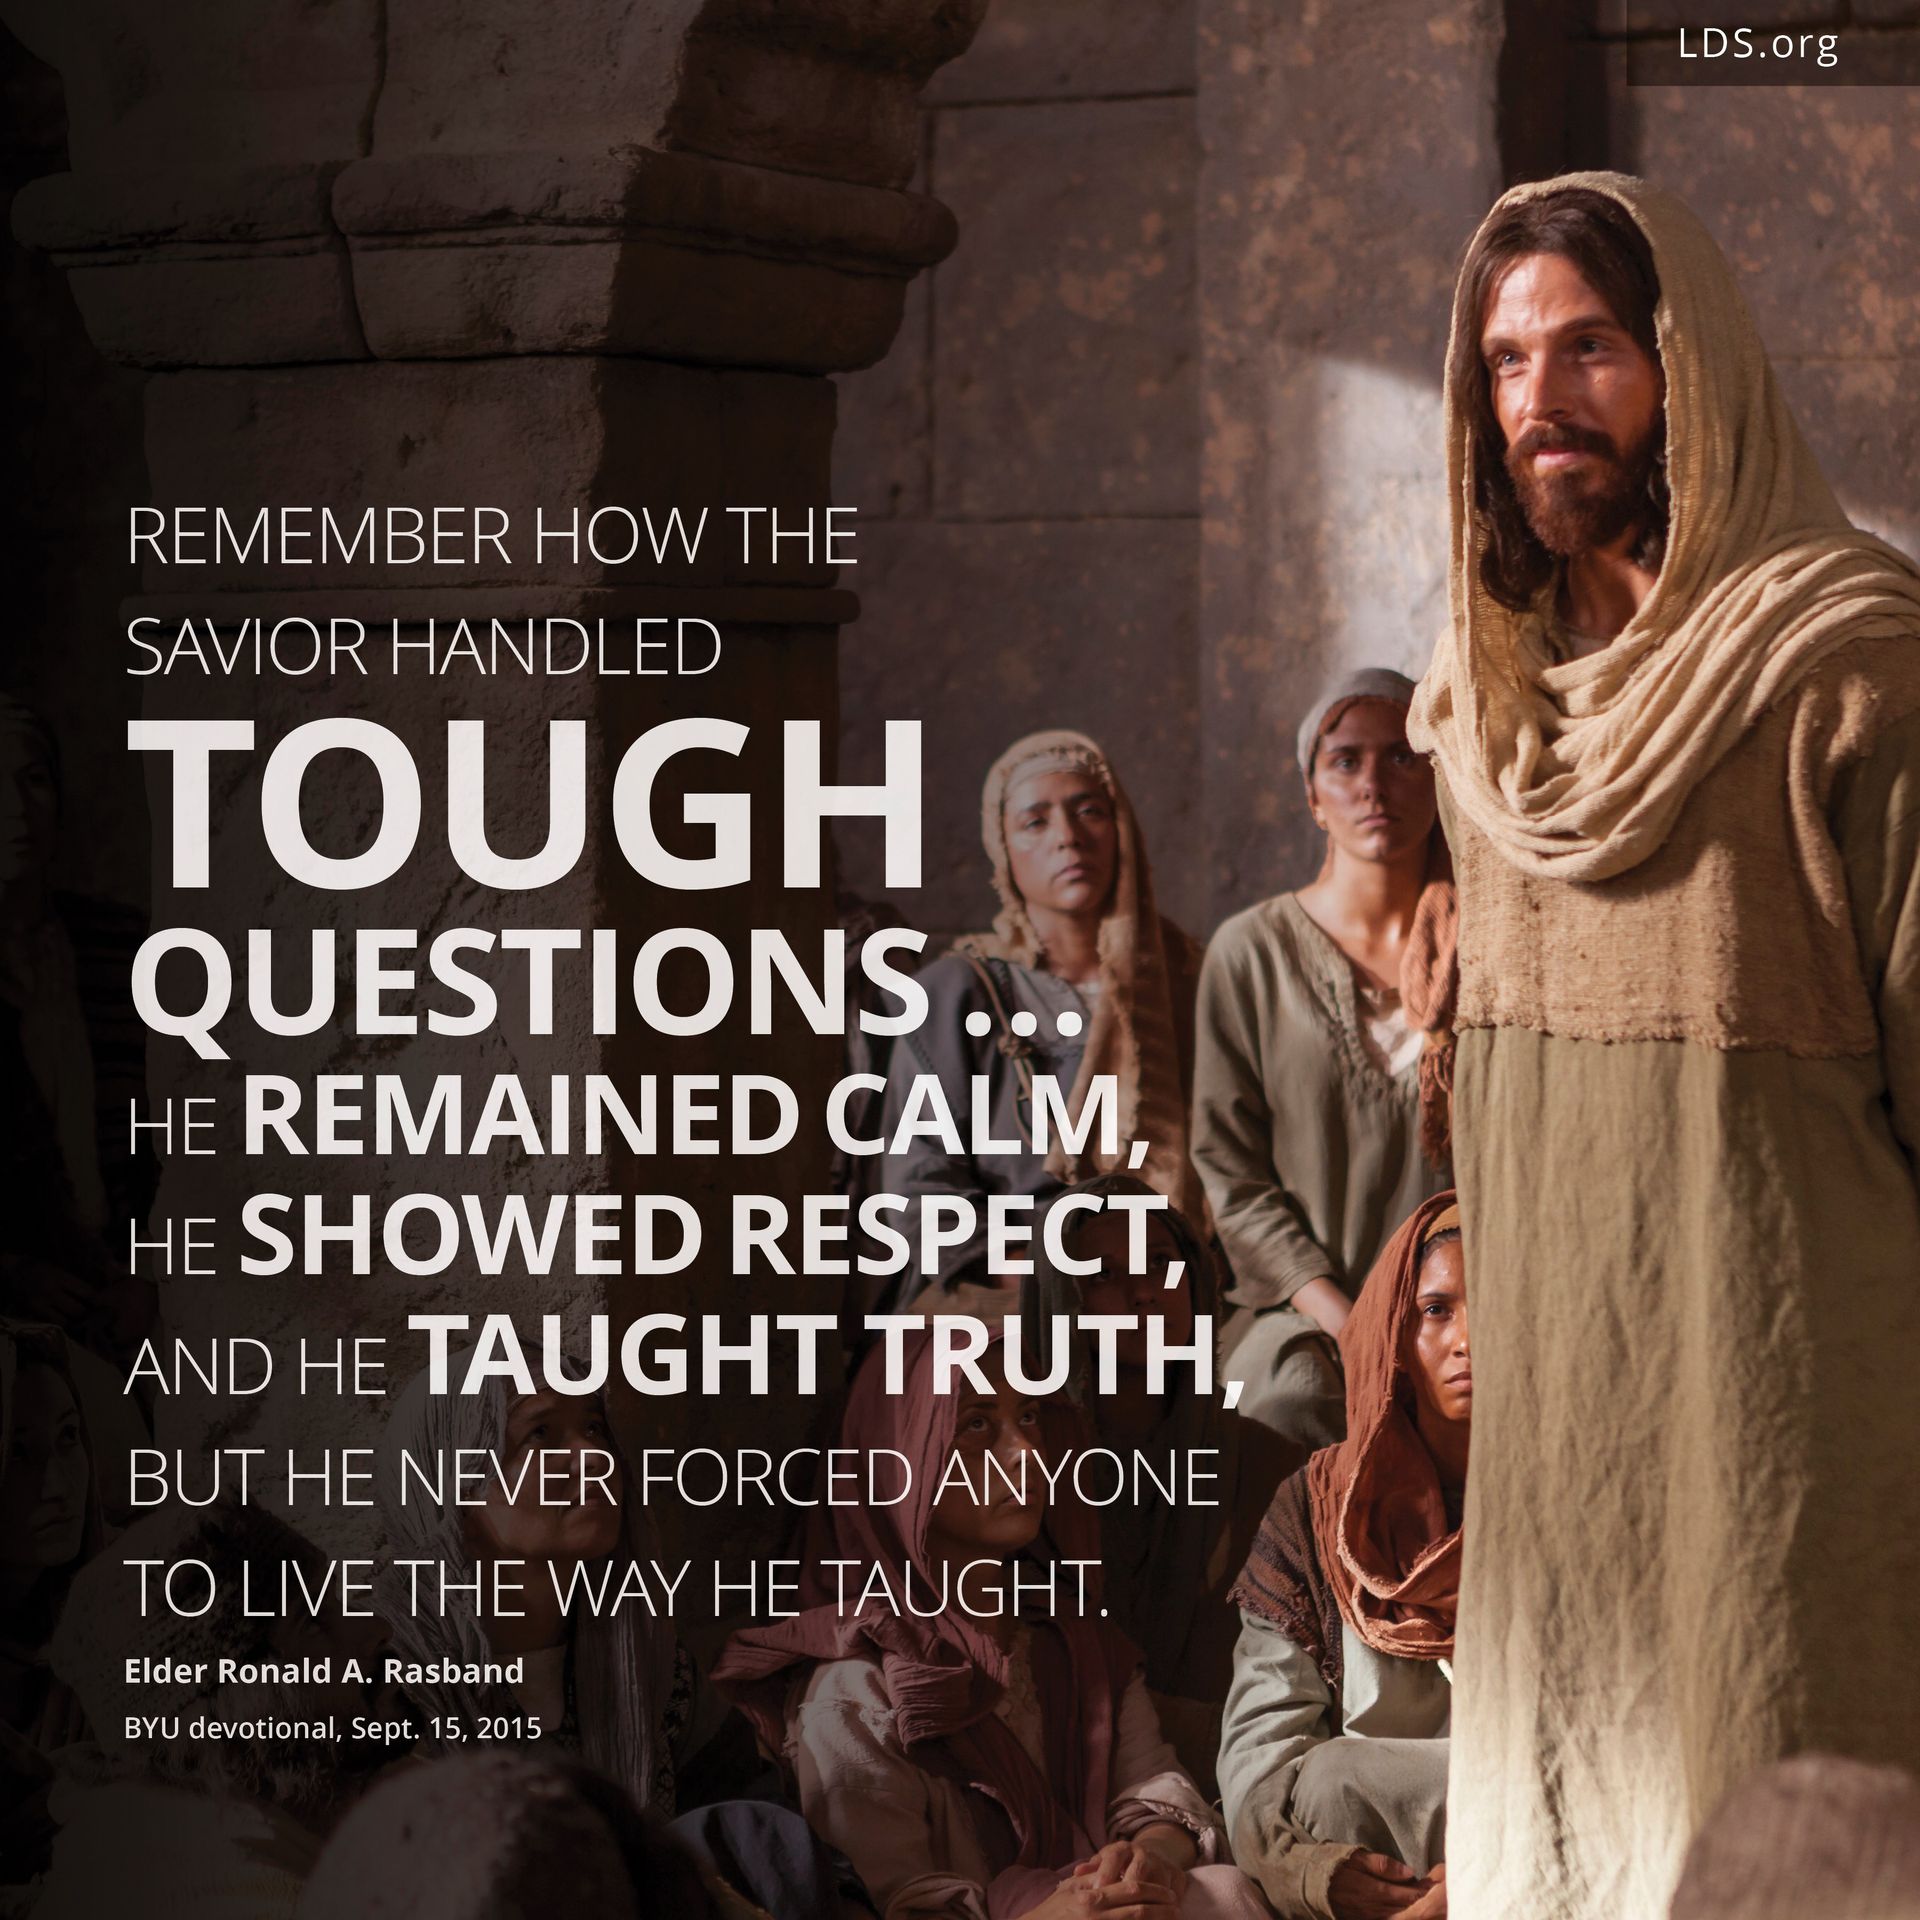 “Remember how the Savior handled tough questions. … He remained calm, He showed respect, and He taught truth, but He never forced anyone to live the way He taught.”—Elder Ronald A. Rasband, BYU devotional, Sept. 15, 2015